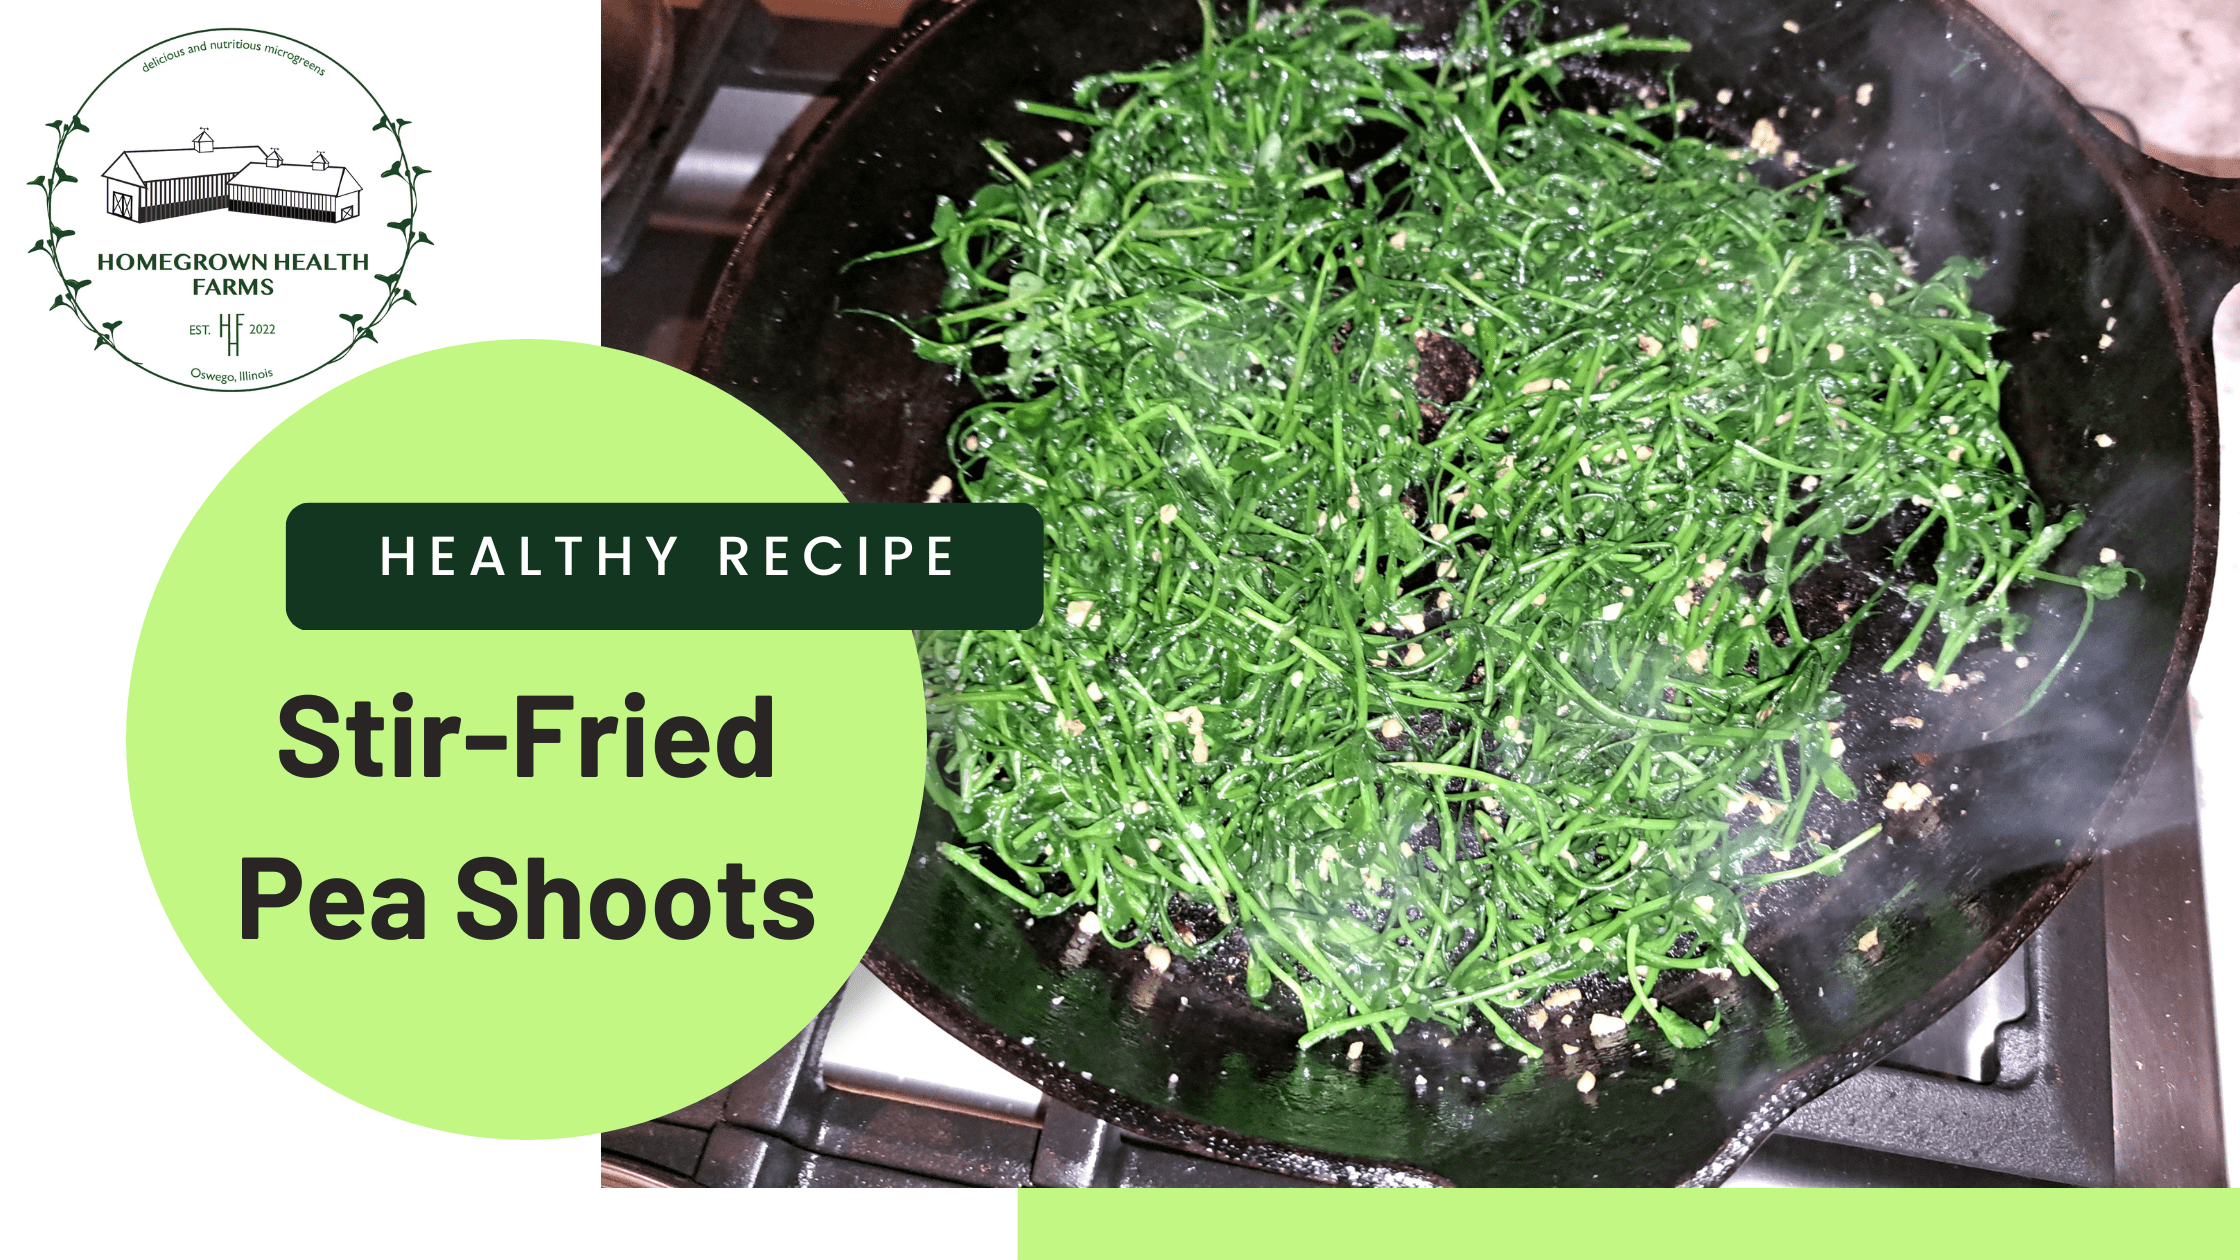 Stir Fried Pea Shoot recipe from Homegrown Health Farms.